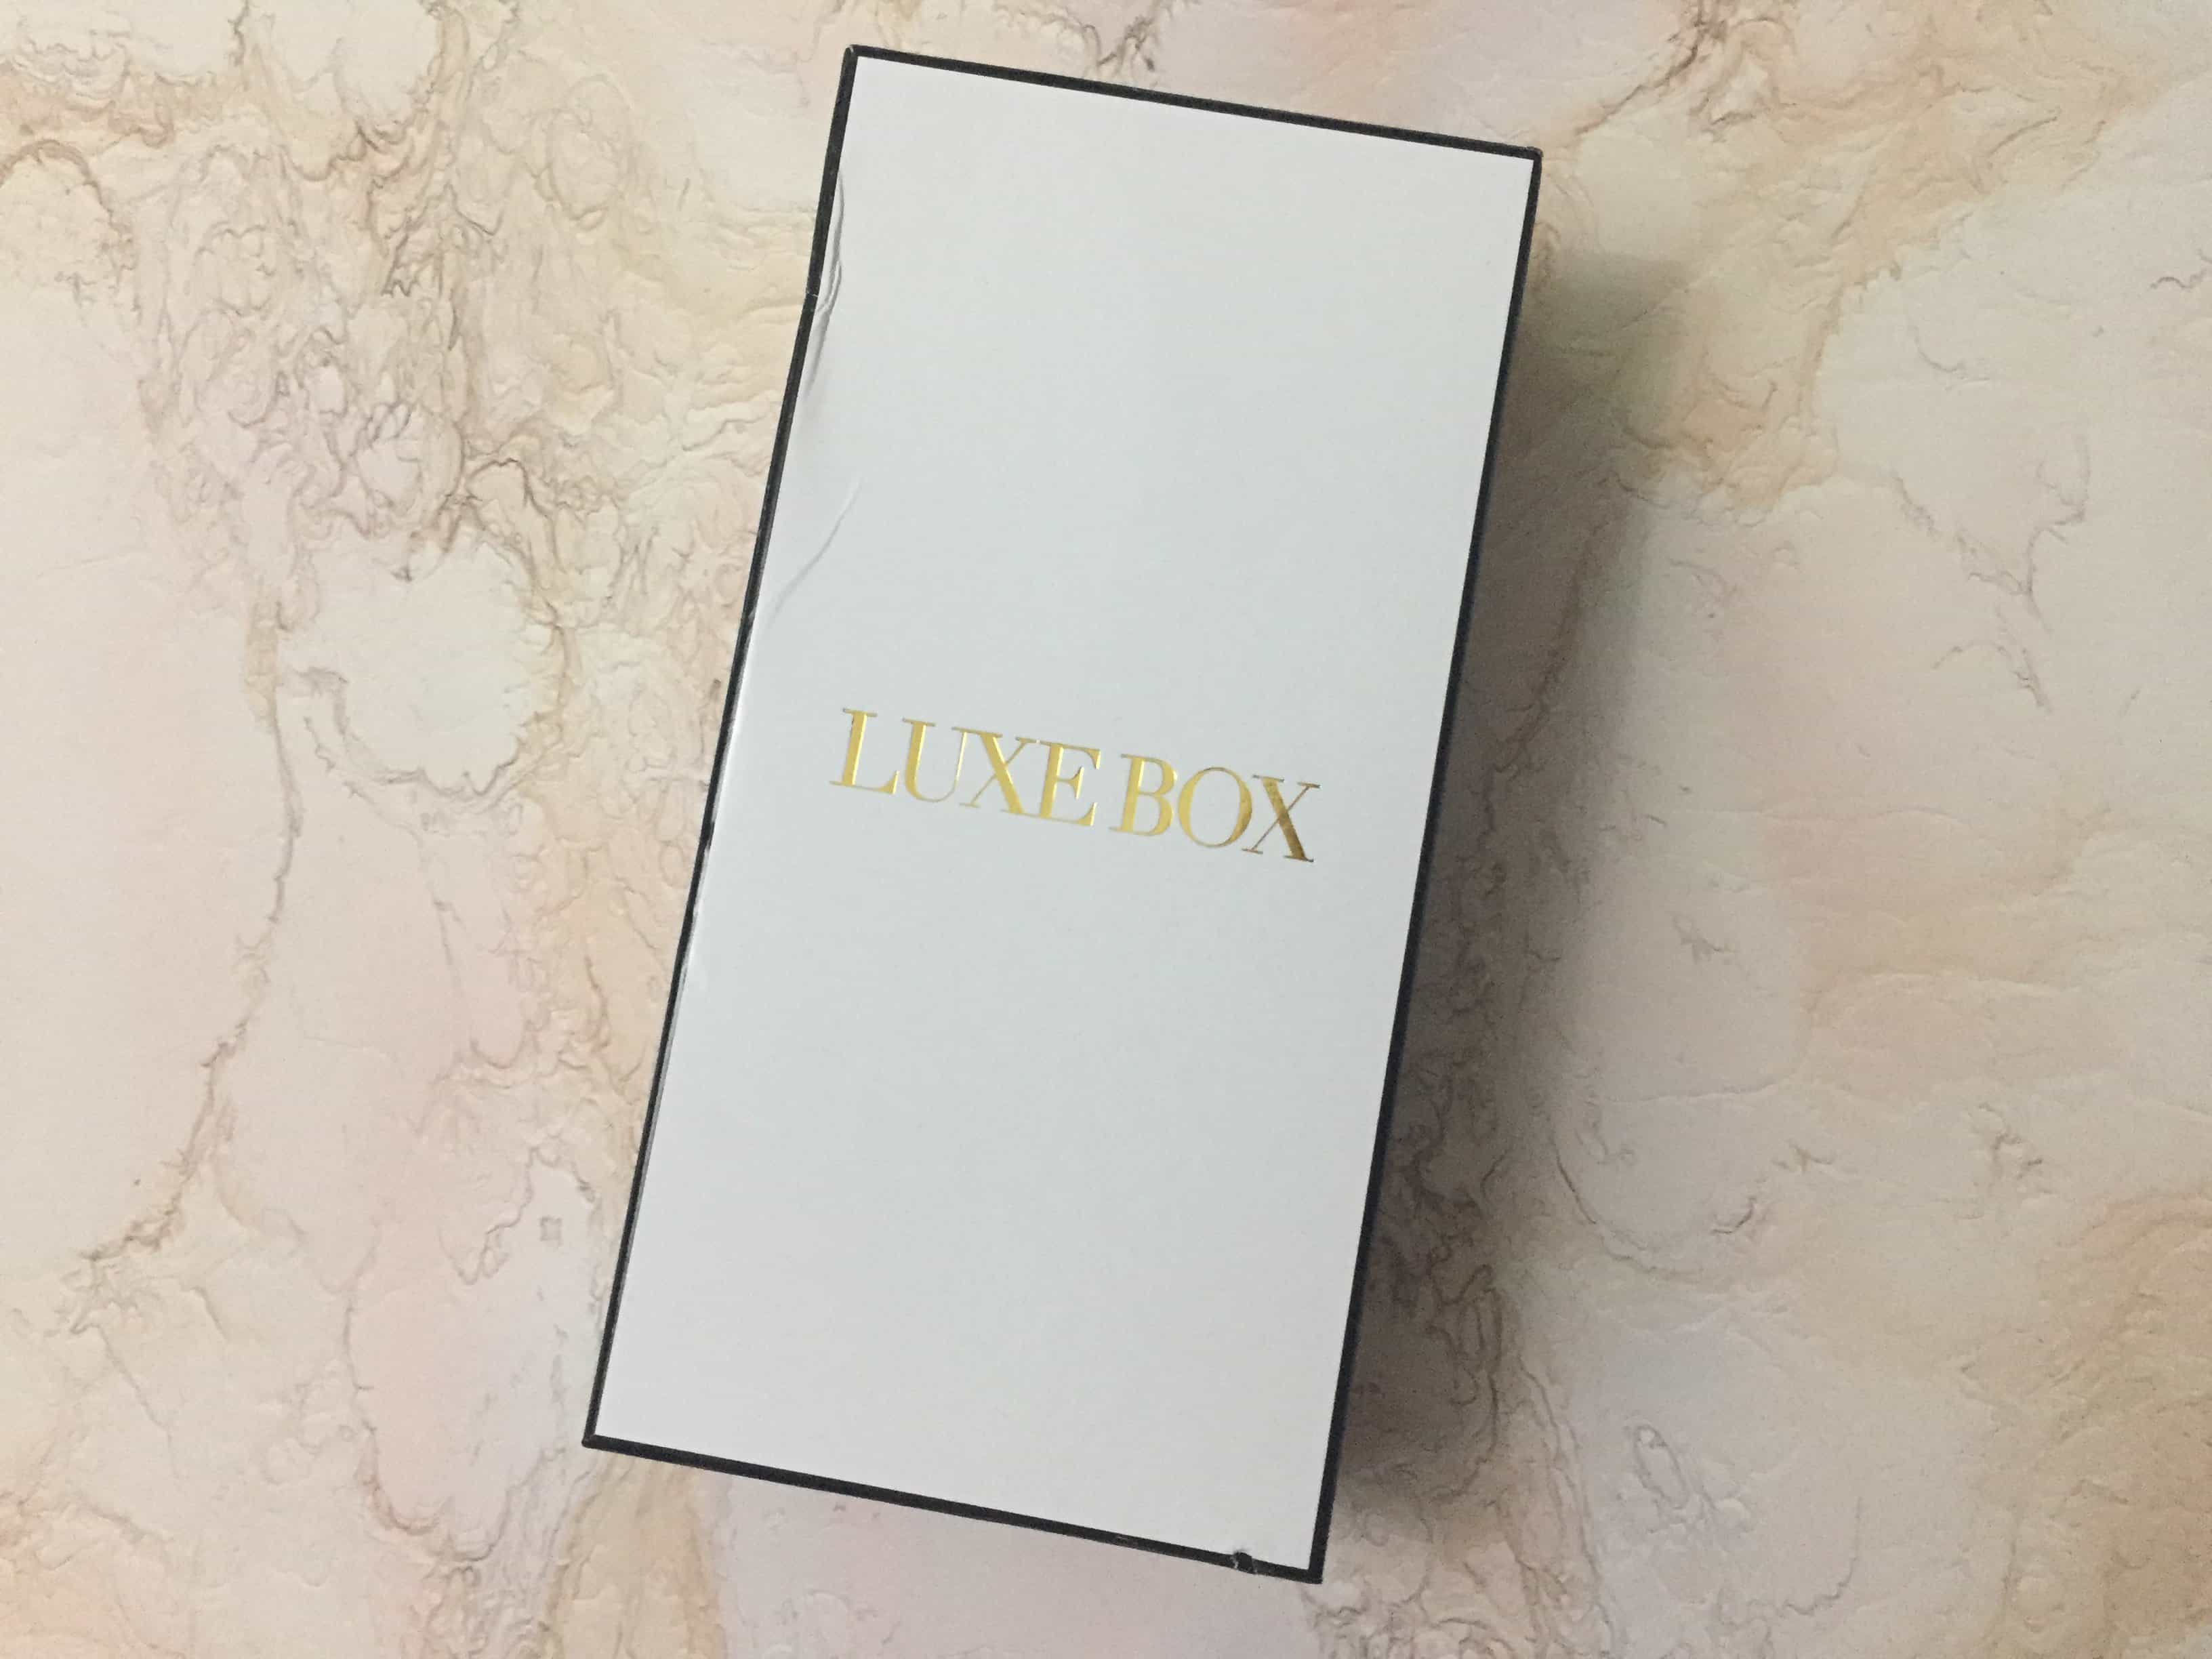 Luxe Box Fall 2017 Subscription Box Review - Hello Subscription